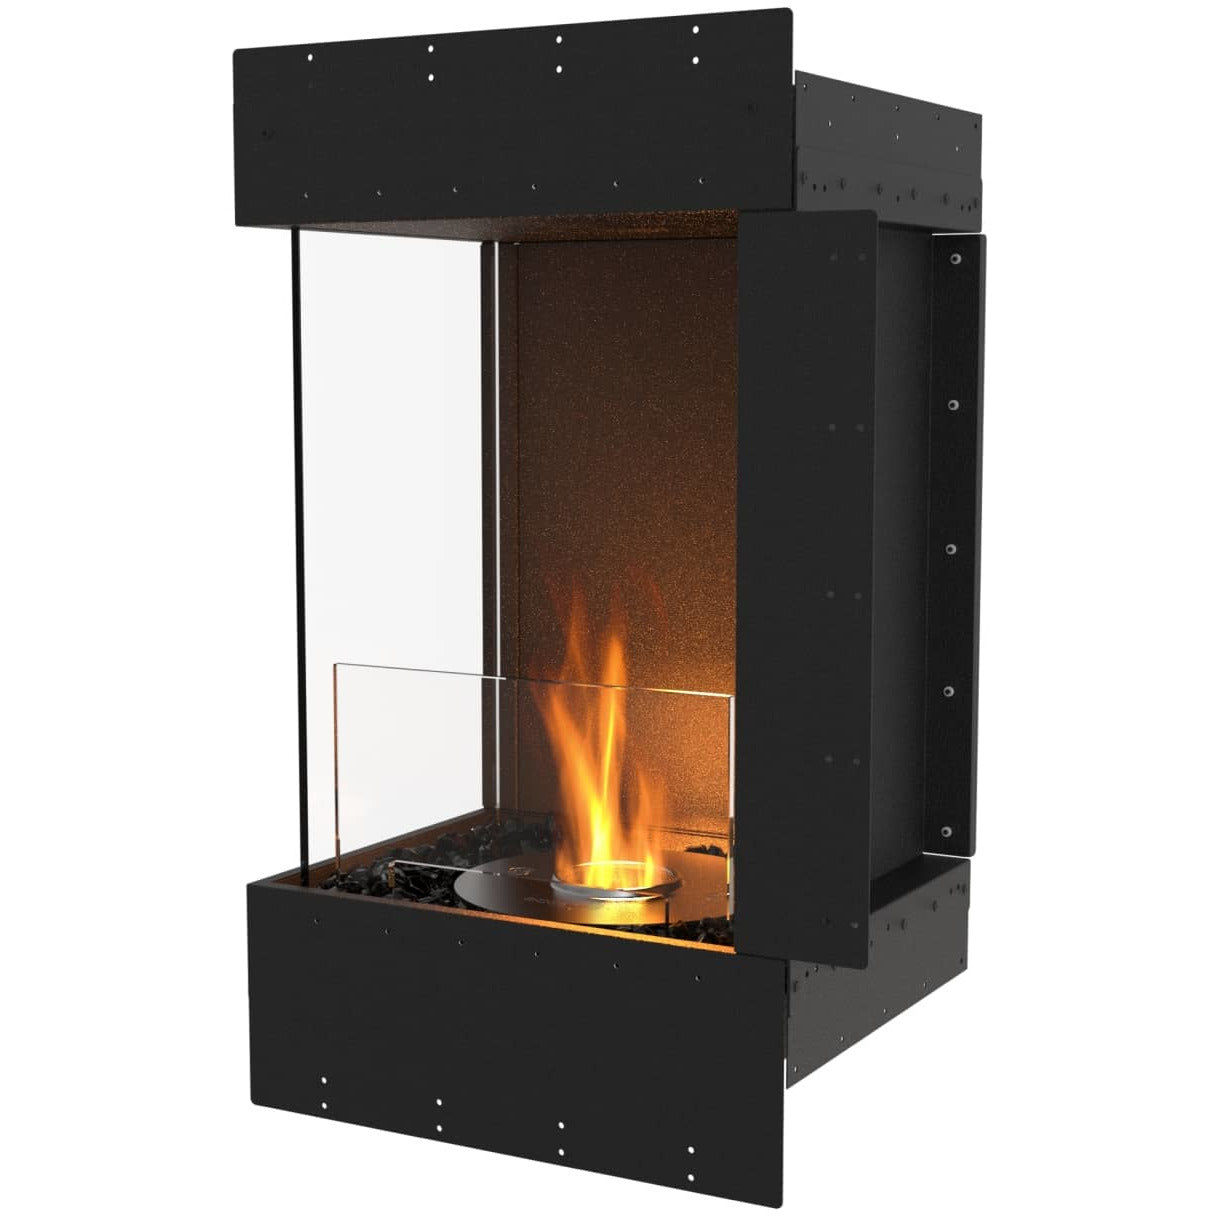 EcoSmart Flex 18 Left Corner Bioethanol Fireplace in Black - 22.8 inches wall fireplace for sale